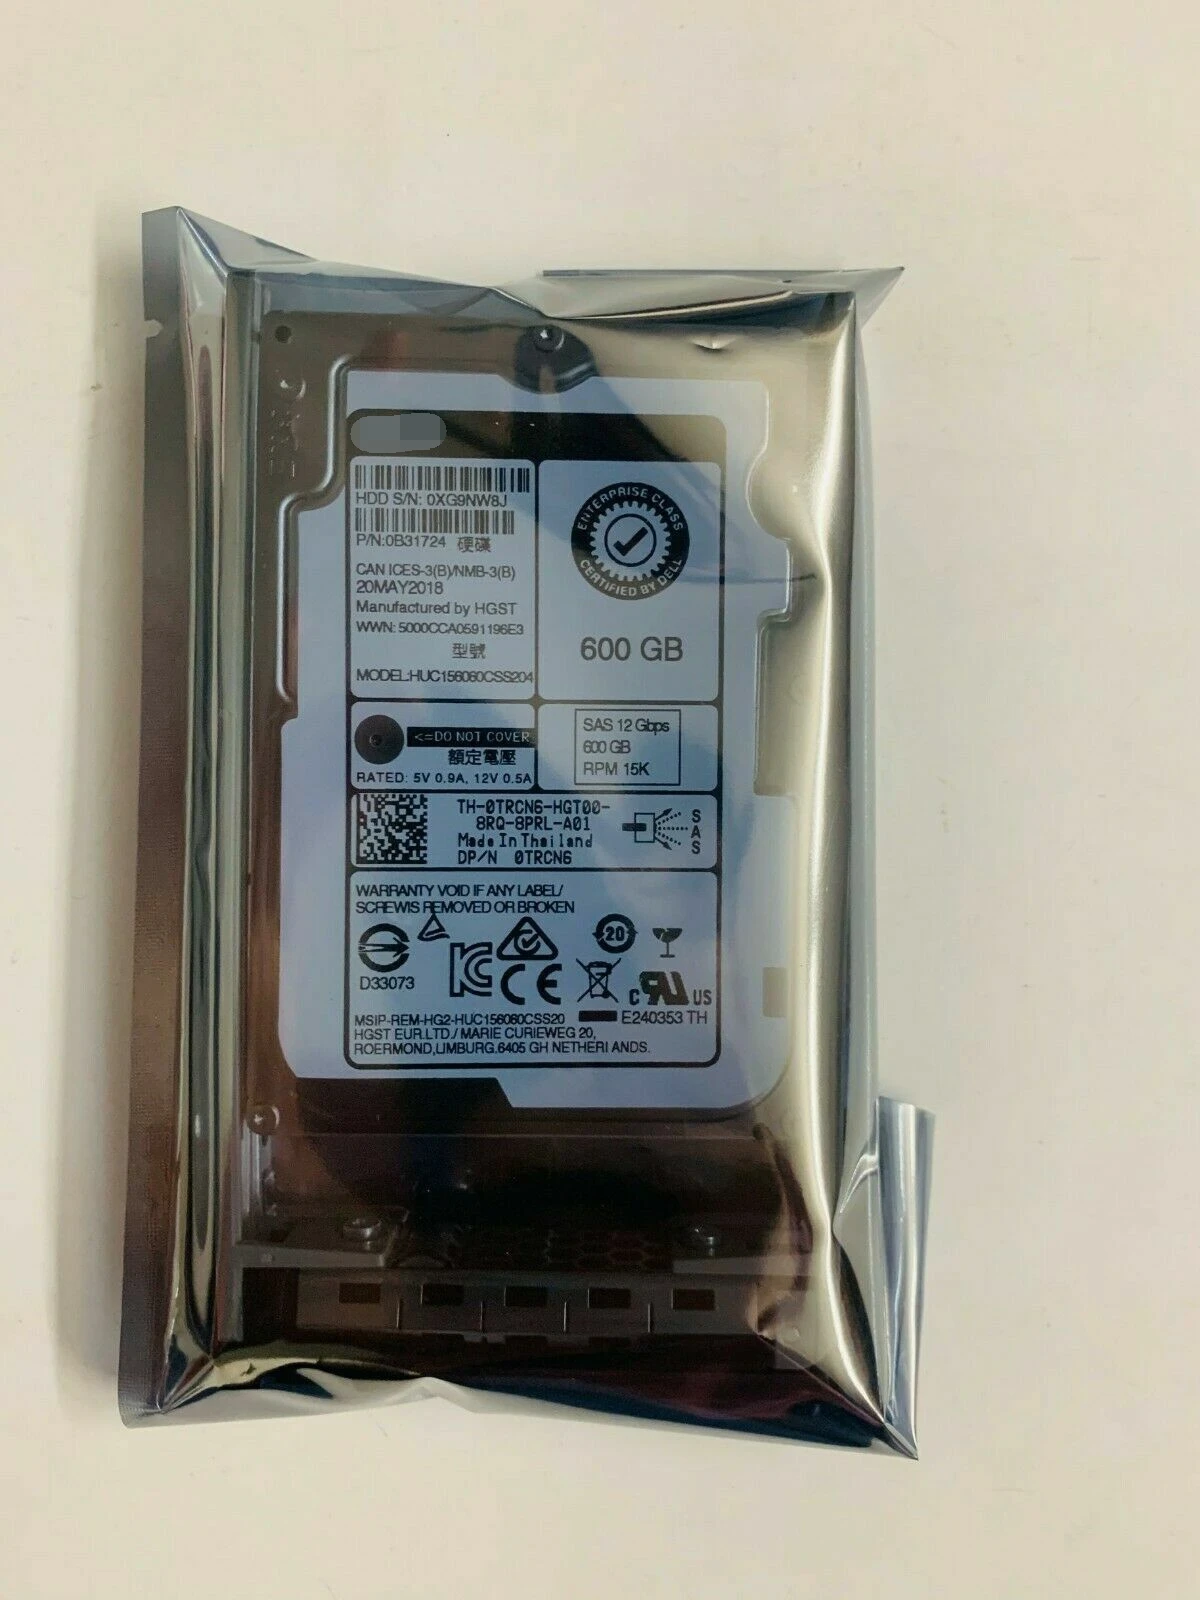 

FOR NEW Dell TRCN6 0TRCN6 600GB 15K SAS 2.5" 12Gb/s HDD Hard Drive With Tray